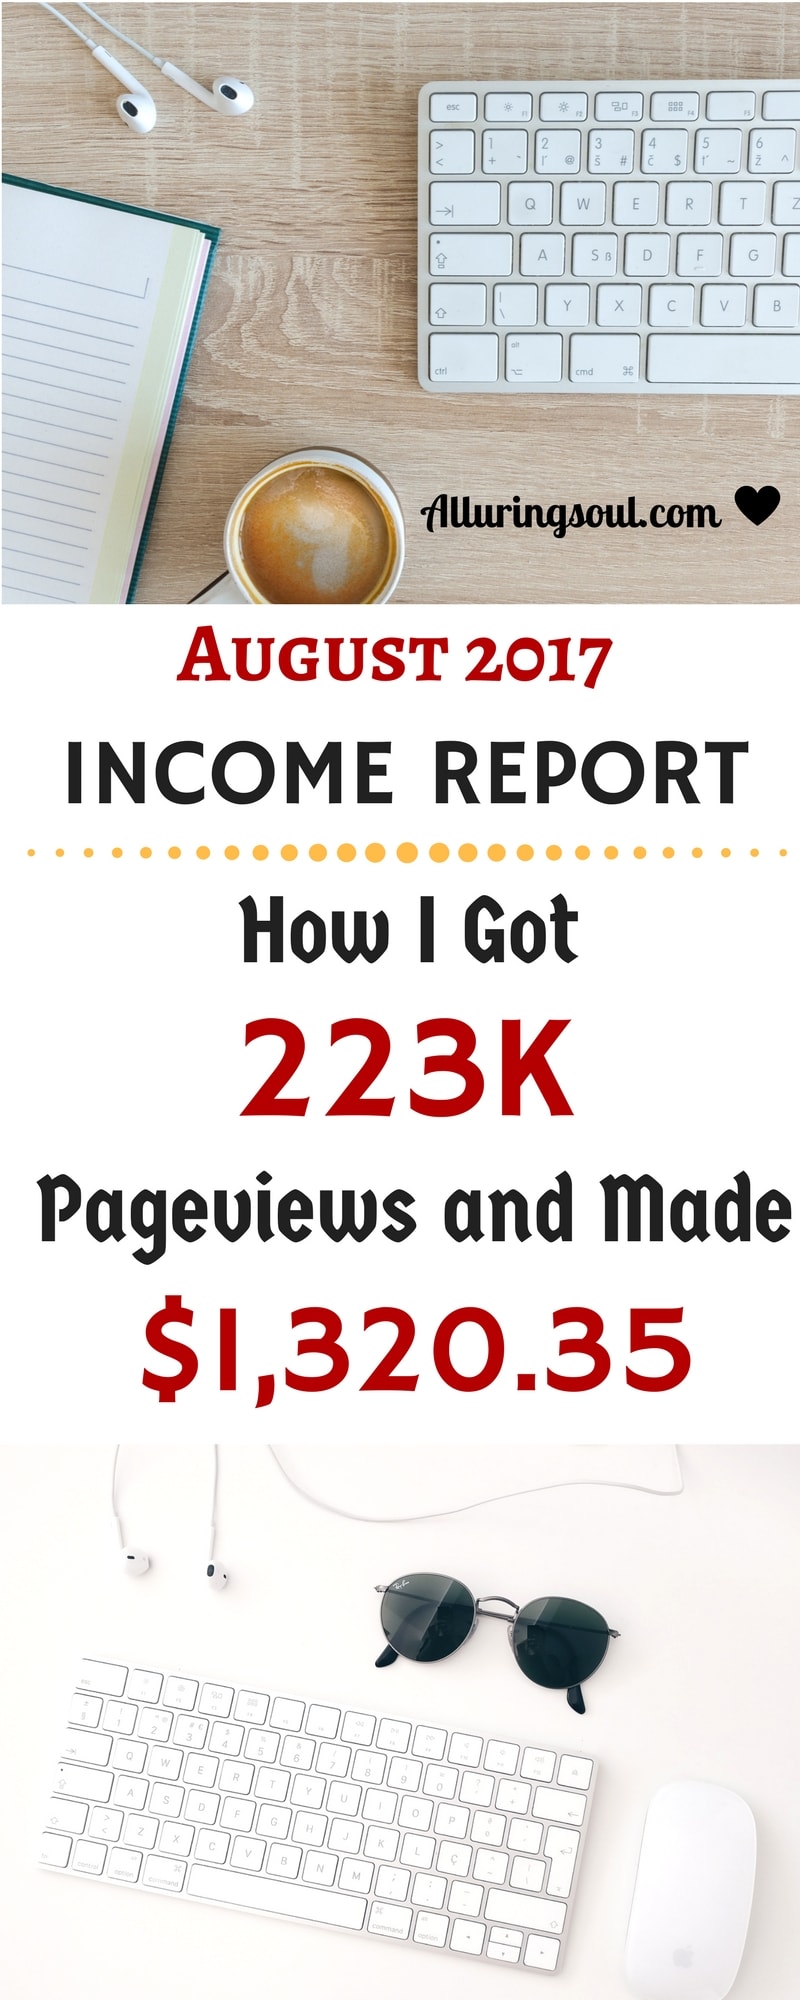 income-report-august-2017-infographic